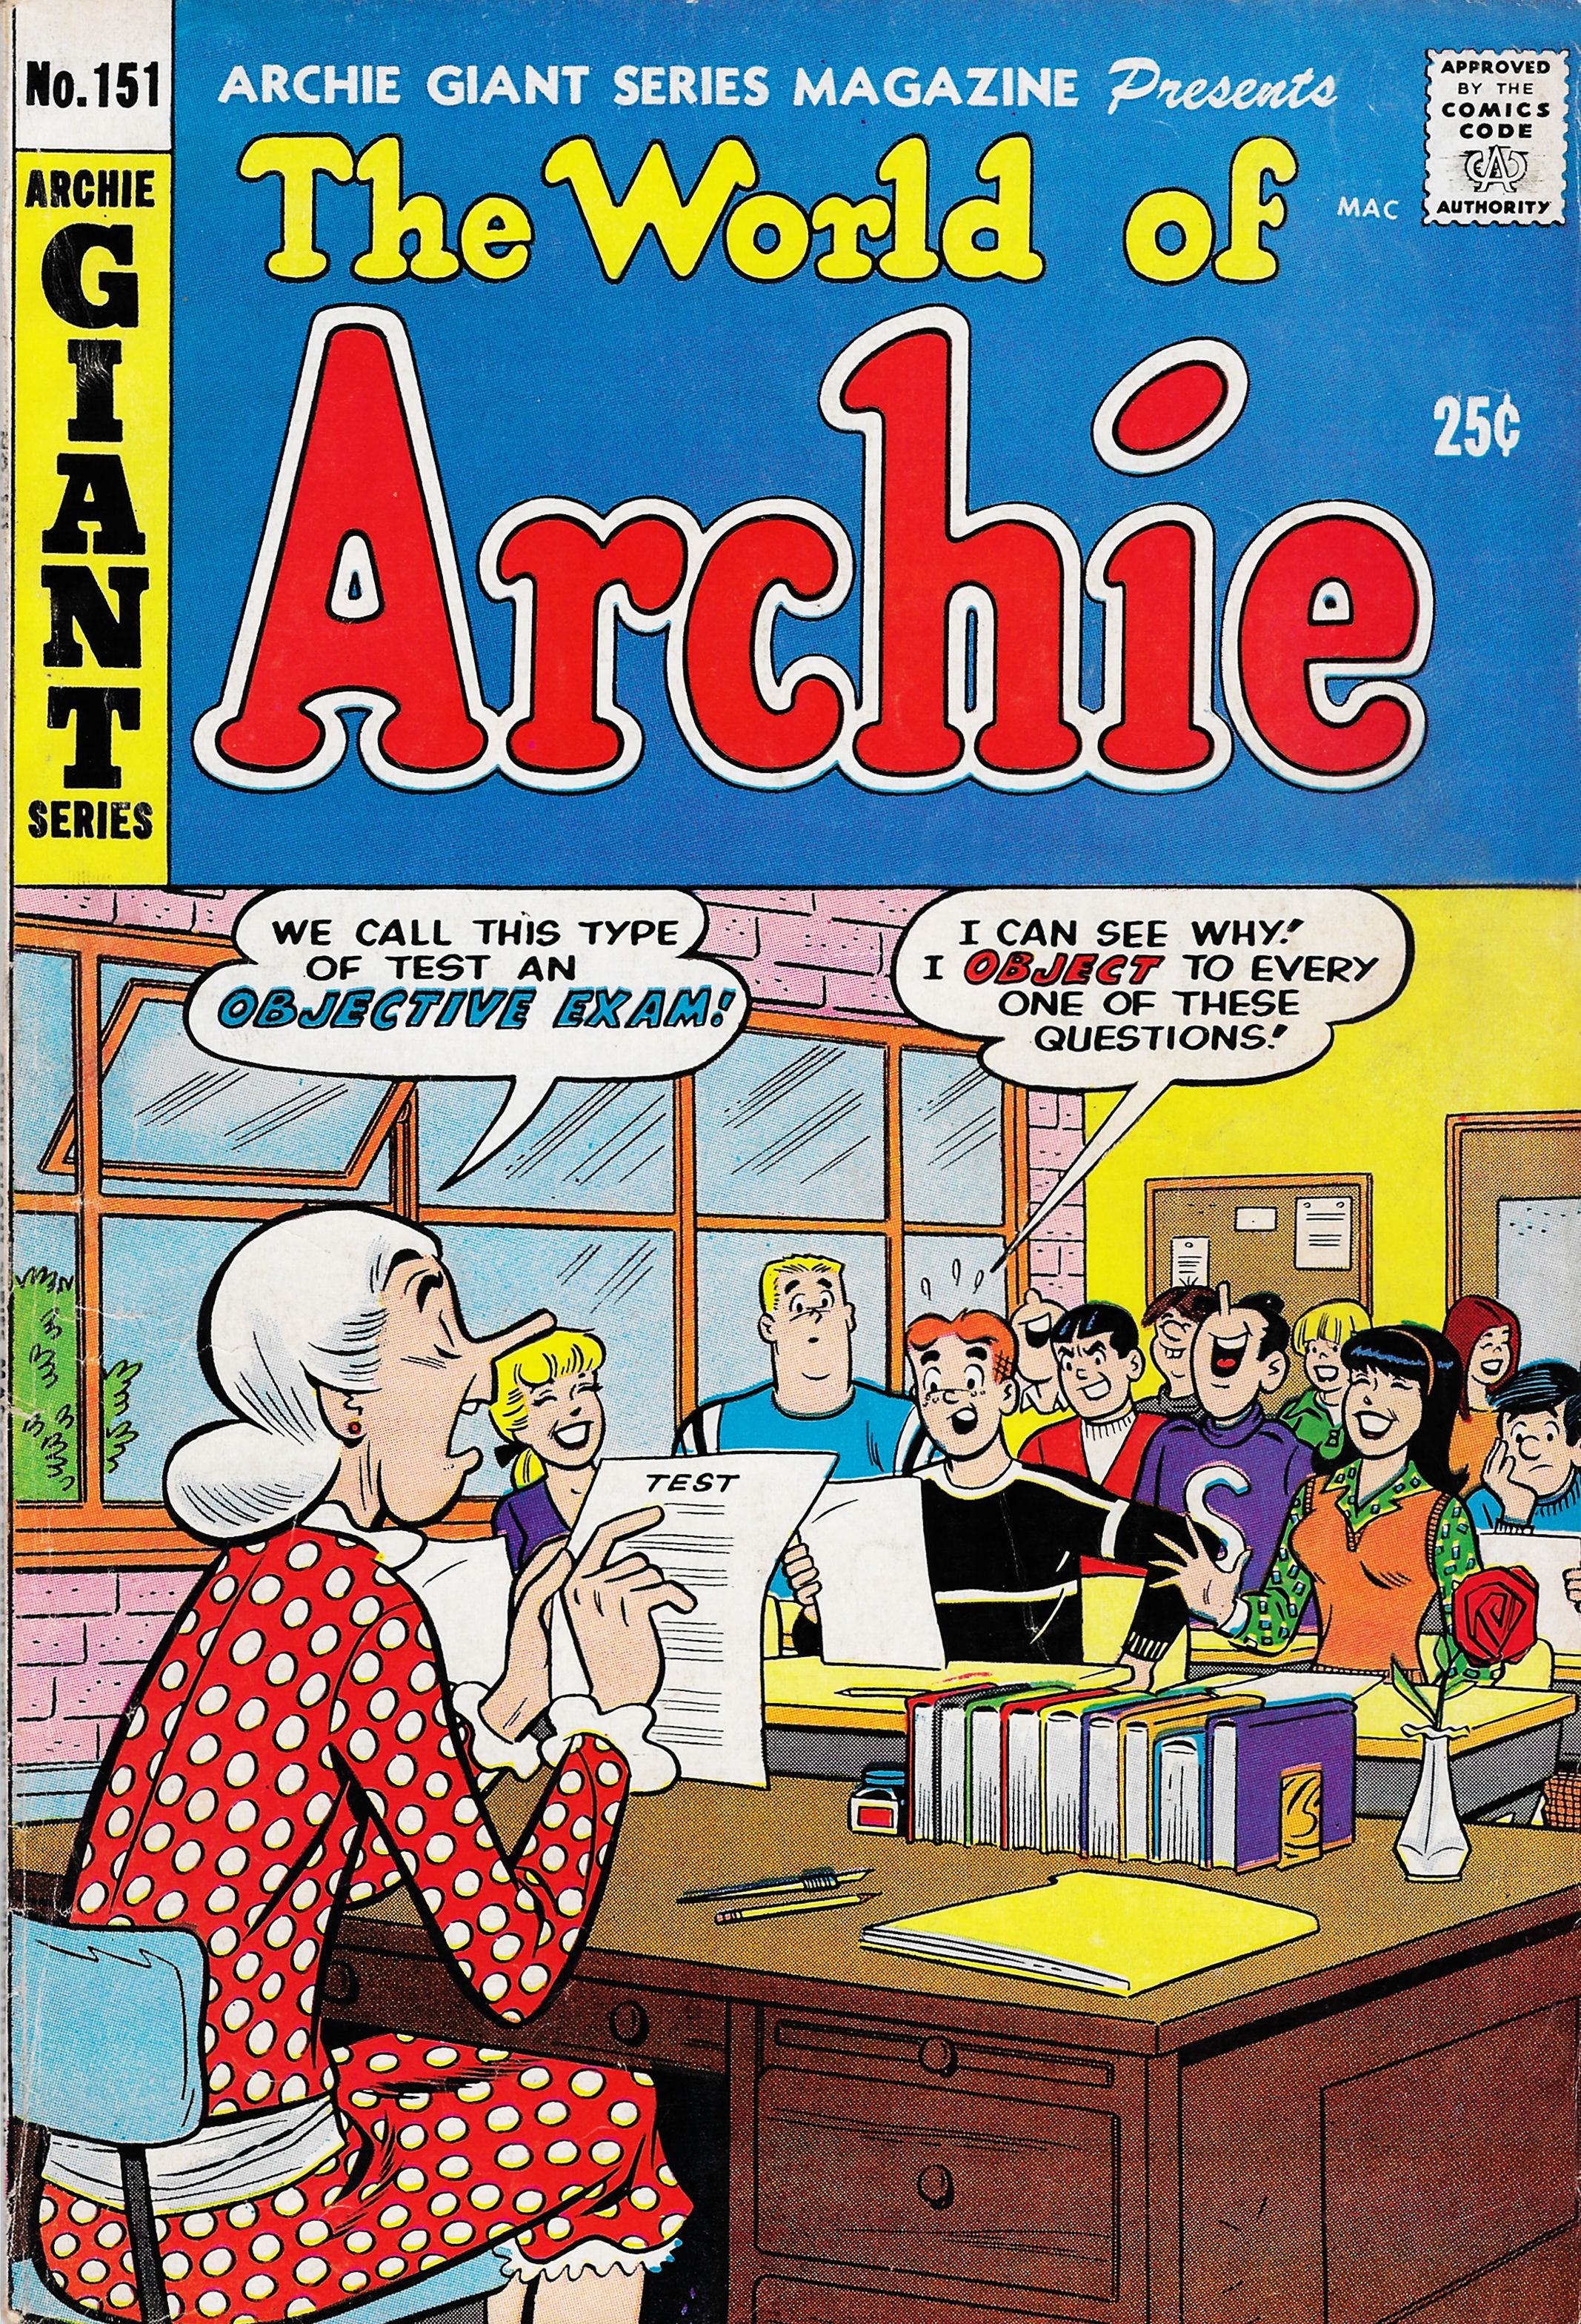 Read online Archie Giant Series Magazine comic -  Issue #151 - 1